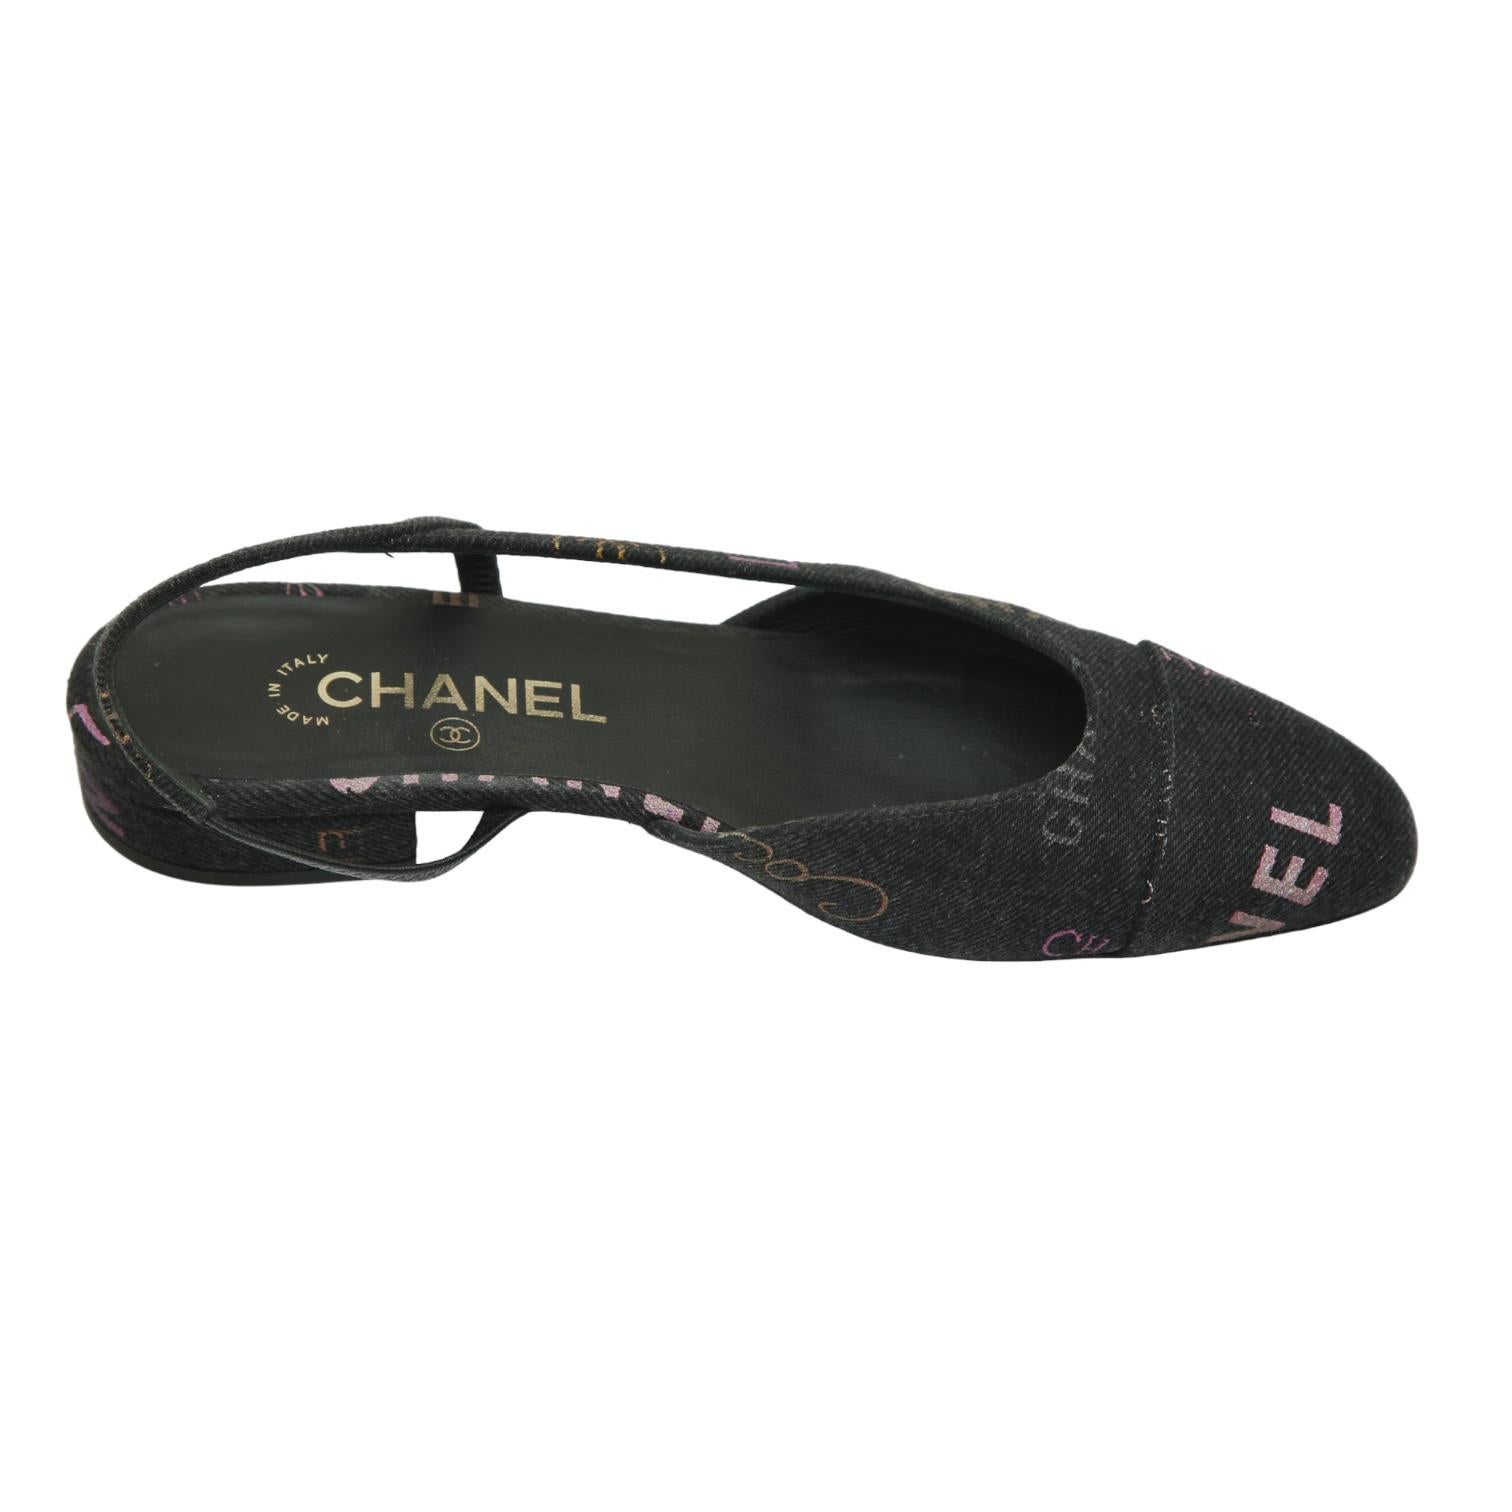 
GUARANTEED AUTHENTIC CHANEL 22P BLACK DENIM LOGO SLINGBACKS

Design:
- Black denim uppers.
- Multicolor logo print.
- Slingback style.
- Slip on.
- Leather insole and outsole.
- Comes with dust bag.

Size: 38

Measurements (Approximate):
- Insole: